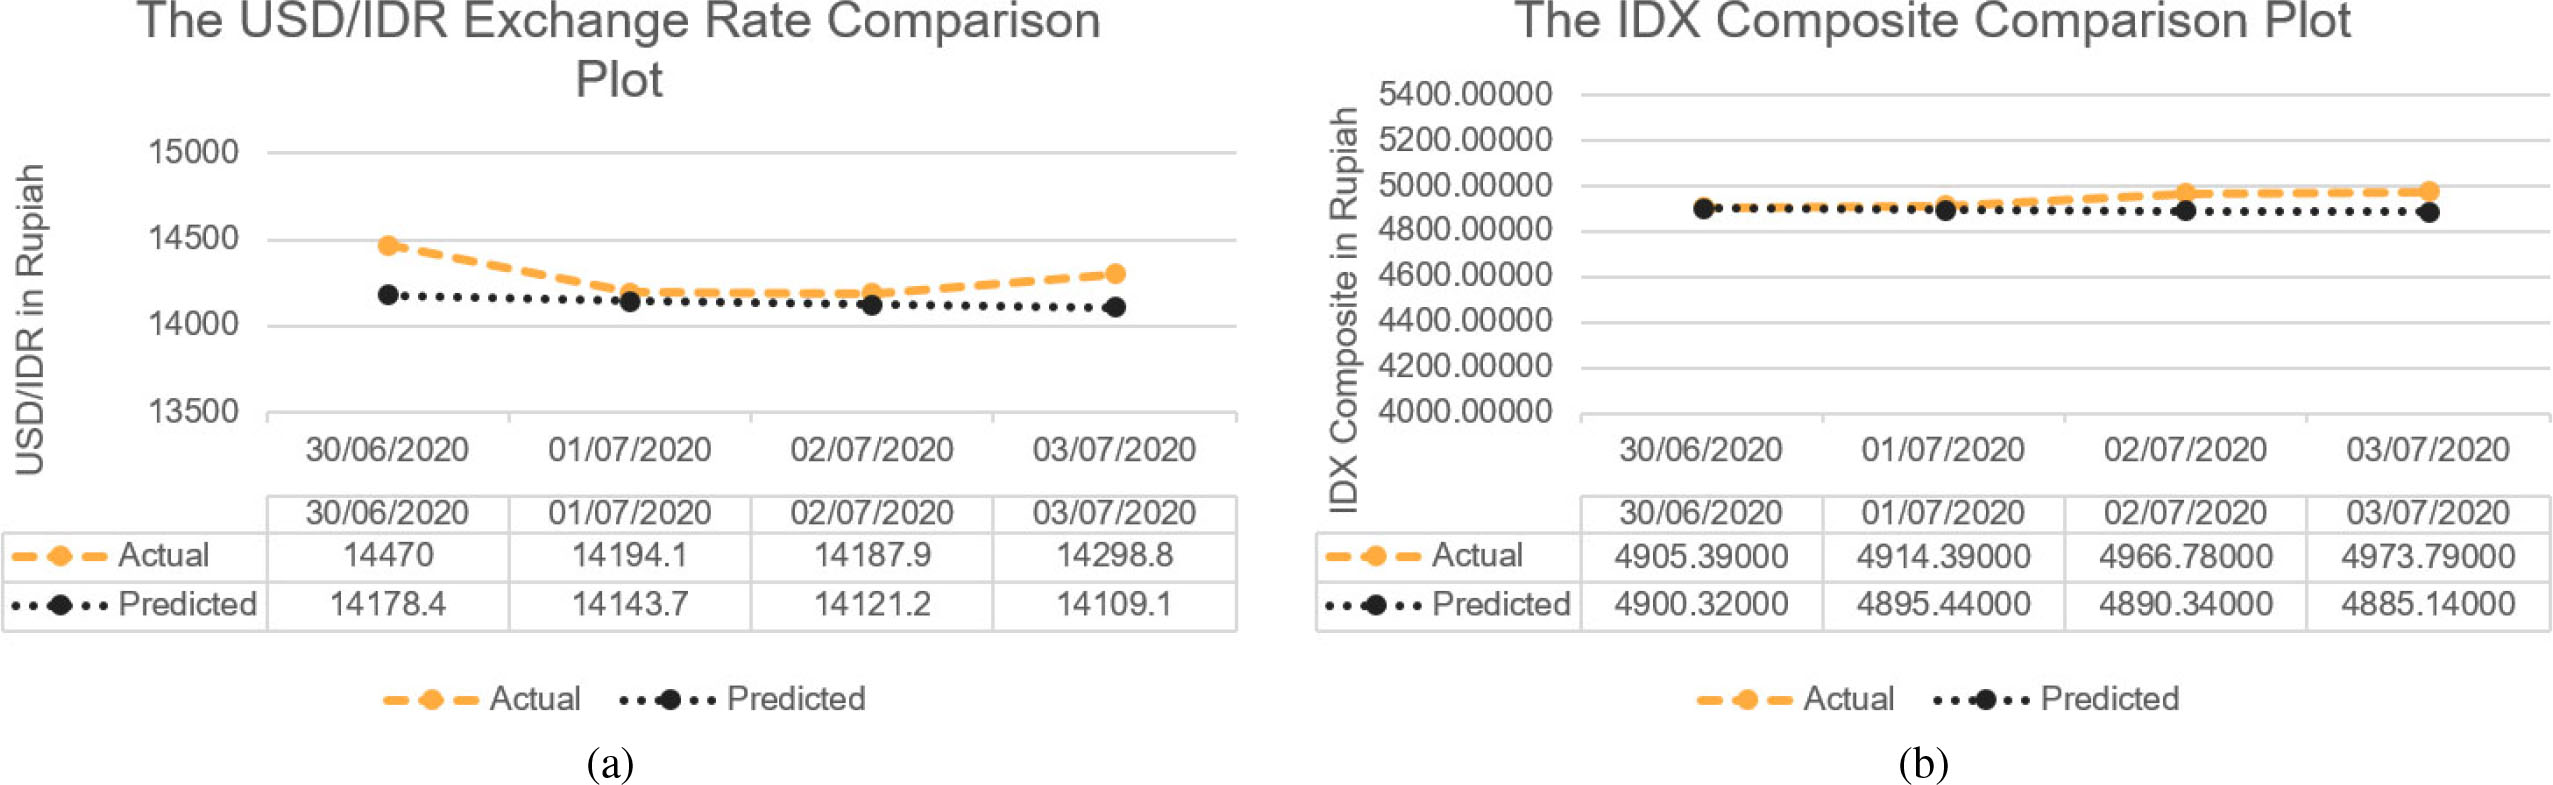 Comparison of Predicted Value and Actual Value for (a) The USD/IDR exchange rate, and (b) The IDX composite prediction. Both plots show the quite close of predicted and actual values.